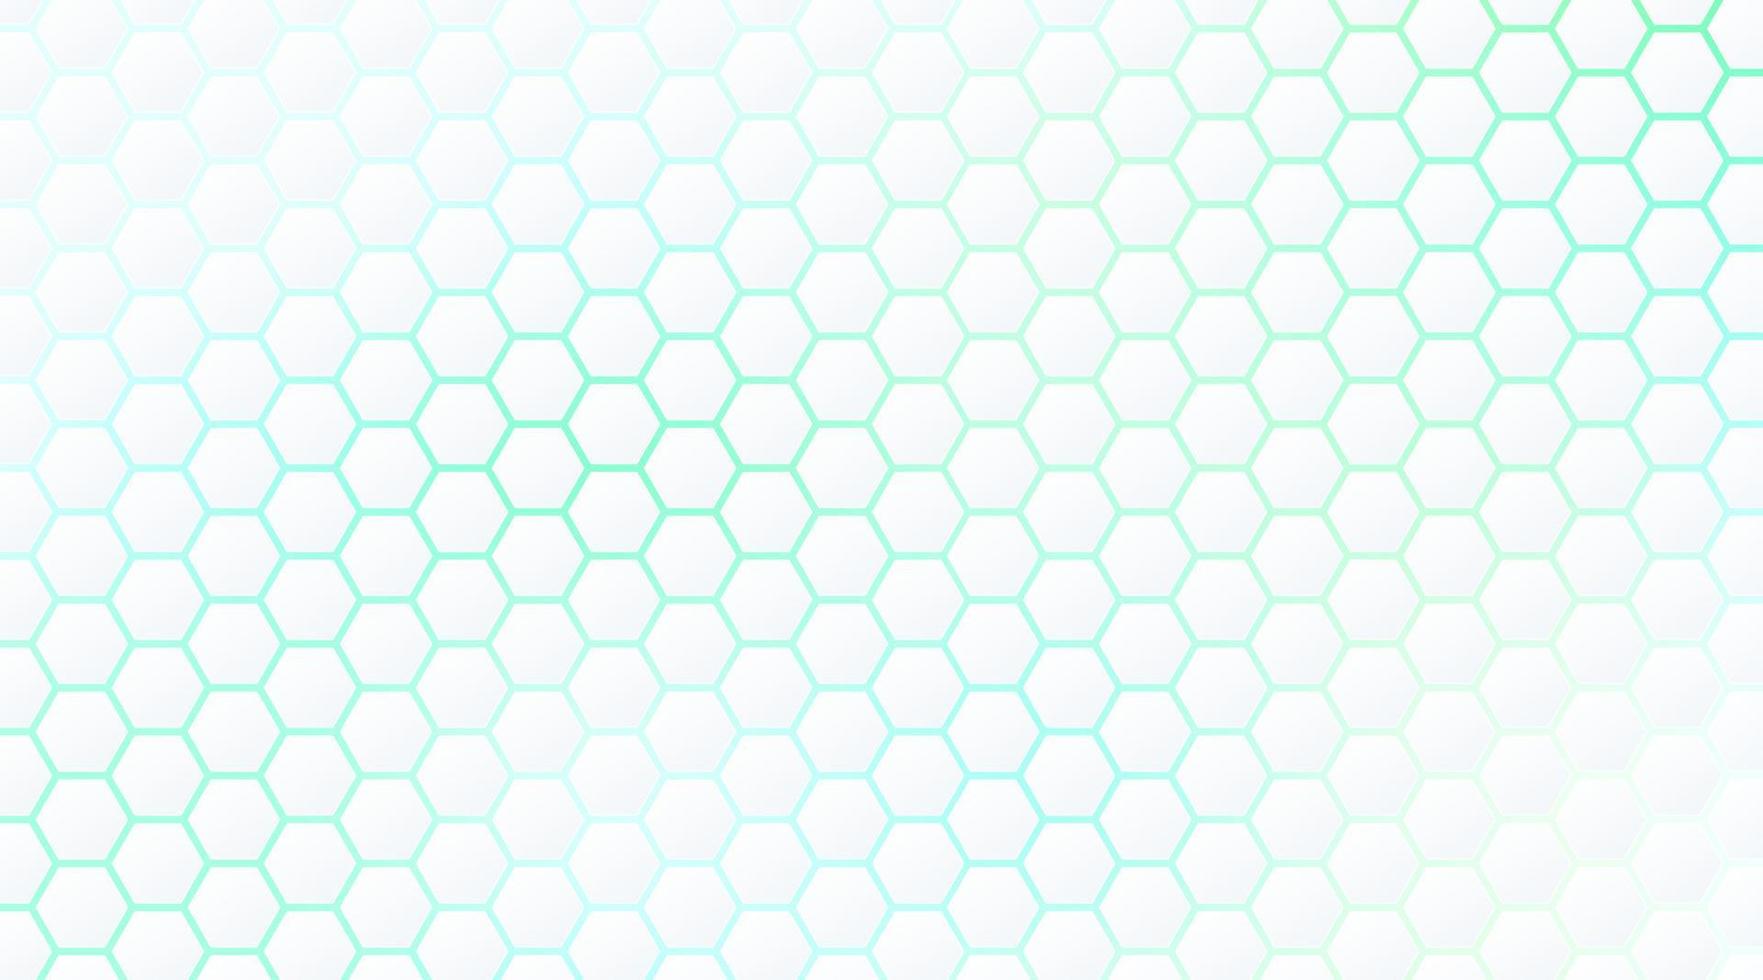 Abstract white hexagon pattern on green and blue neon light background technology style. Modern futuristic geometric shape web banner design. You can use for cover template, poster, flyer, print ad. vector